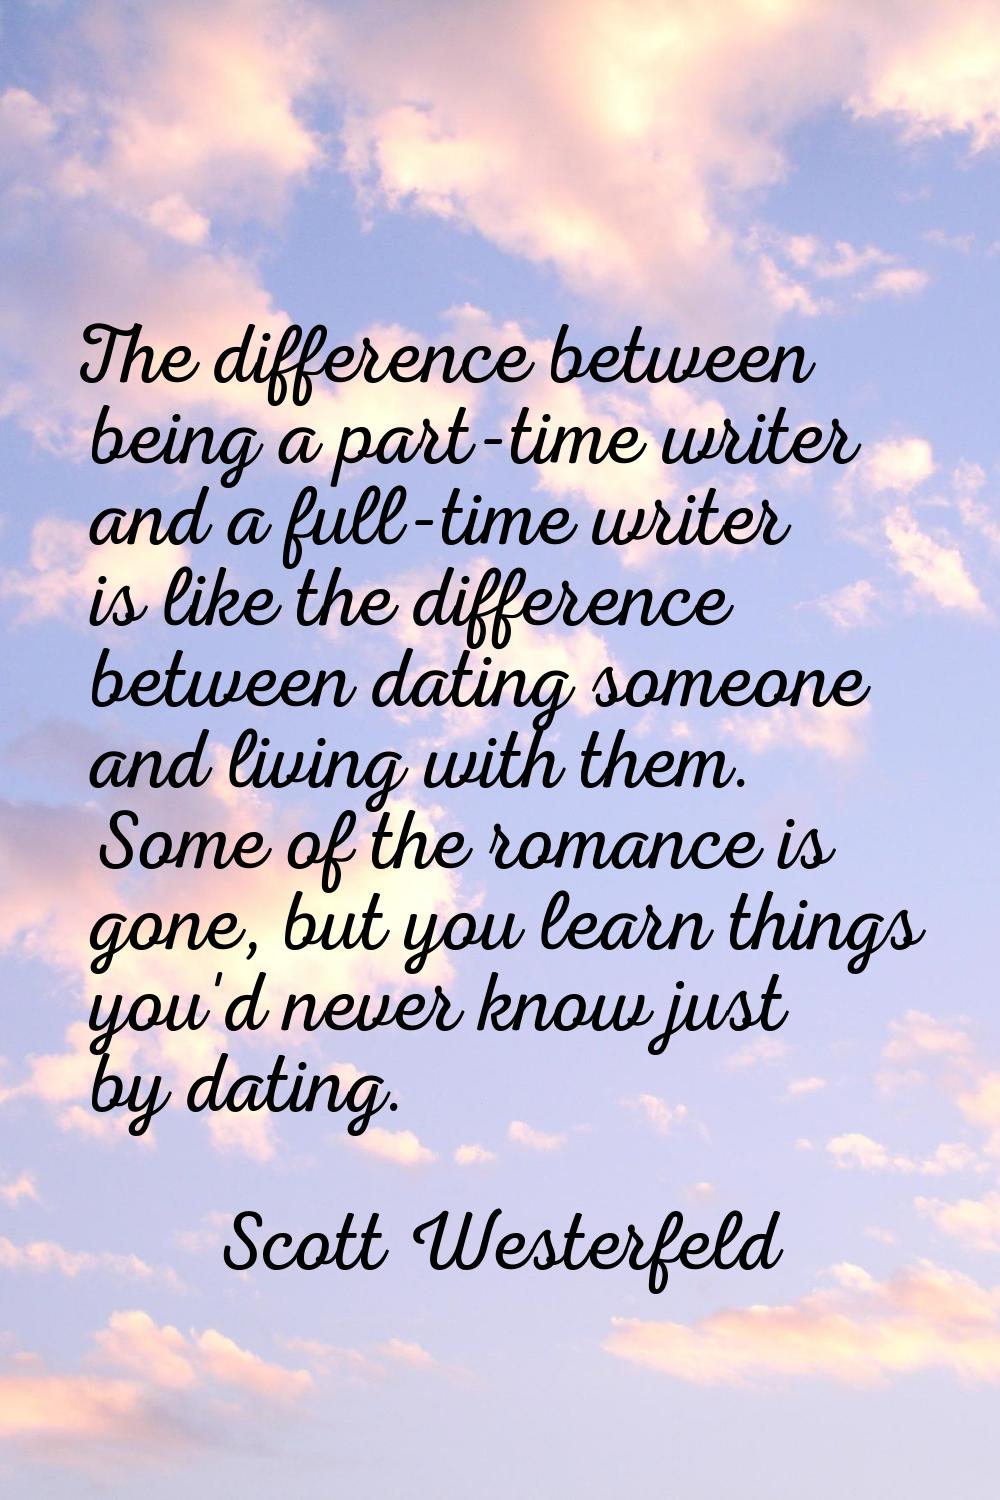 The difference between being a part-time writer and a full-time writer is like the difference betwe